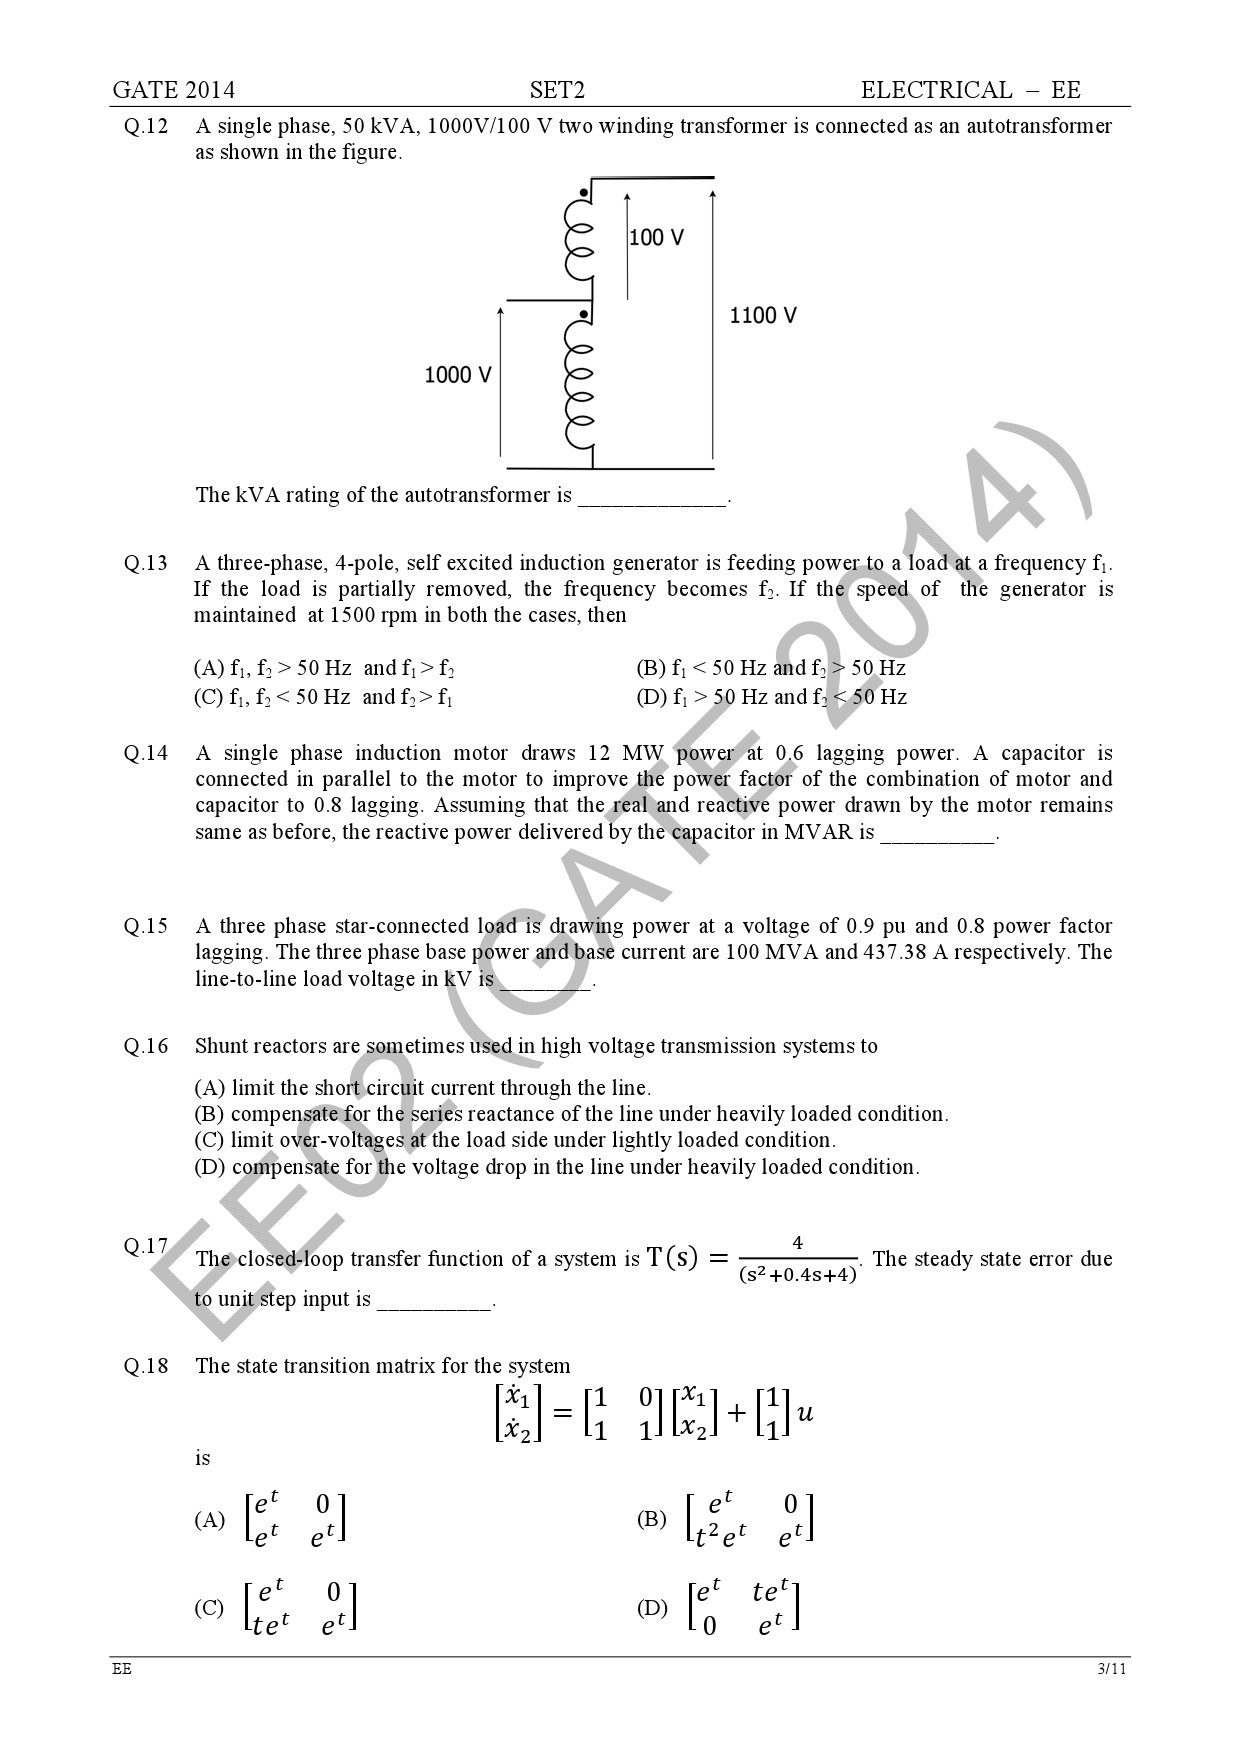 GATE Exam Question Paper 2014 Electrical Engineering Set 2 9